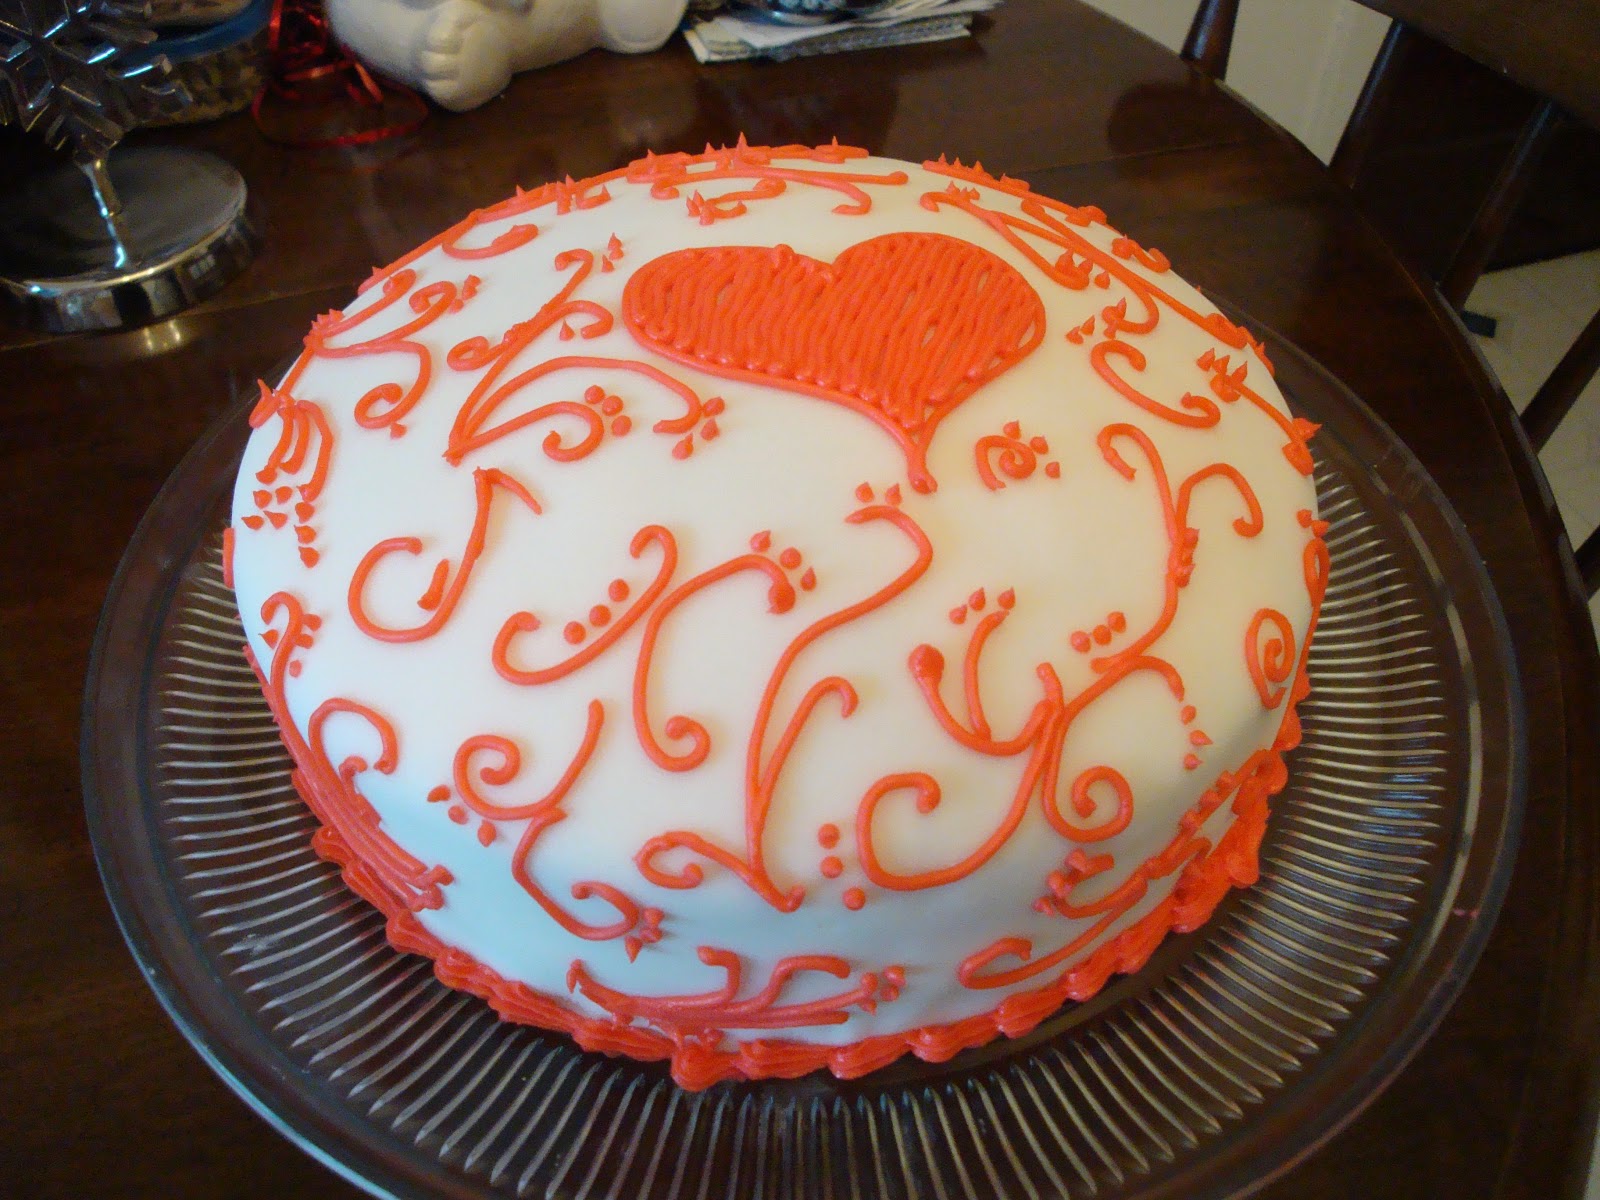 7. Valentine Day 2014 Cakes Picture - Latest New Cake Photo